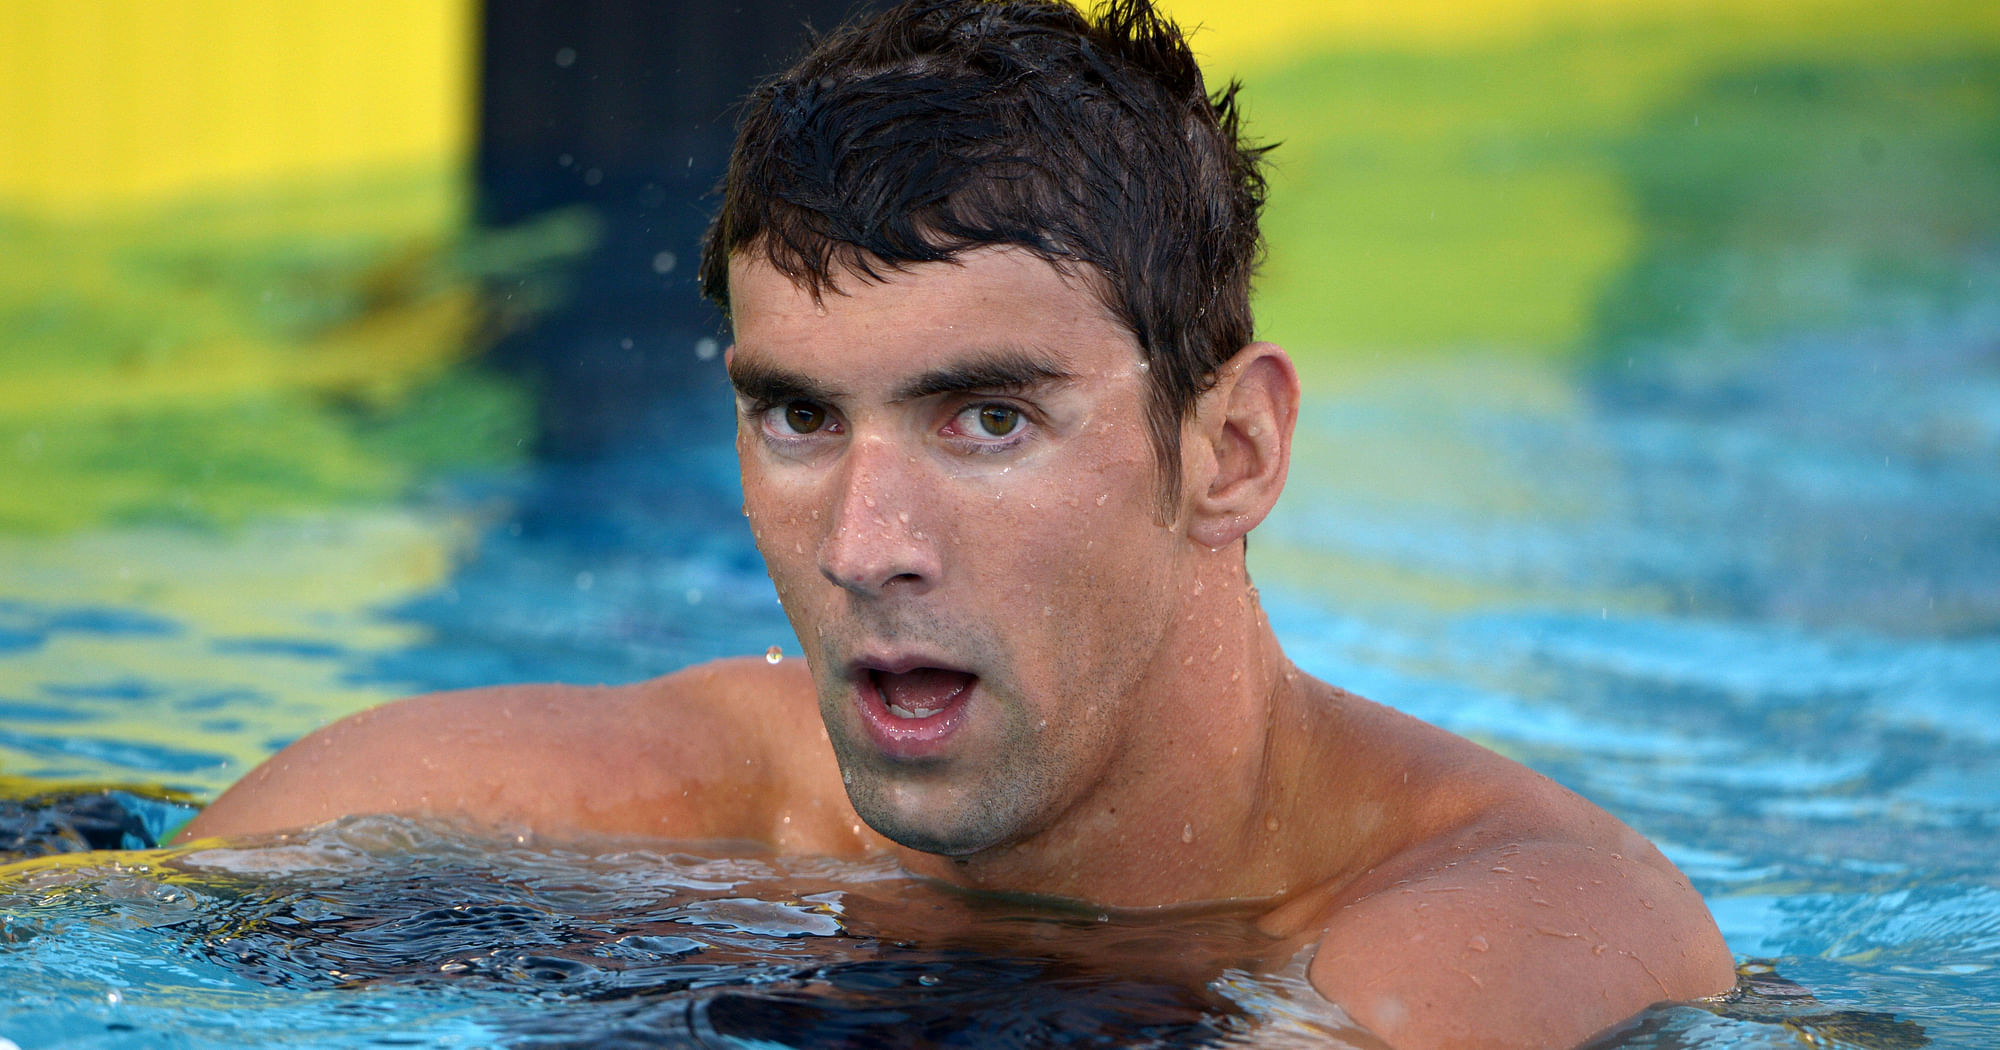 Swimmer Michael Phelps Aiming For A Gold In His Last Olympics